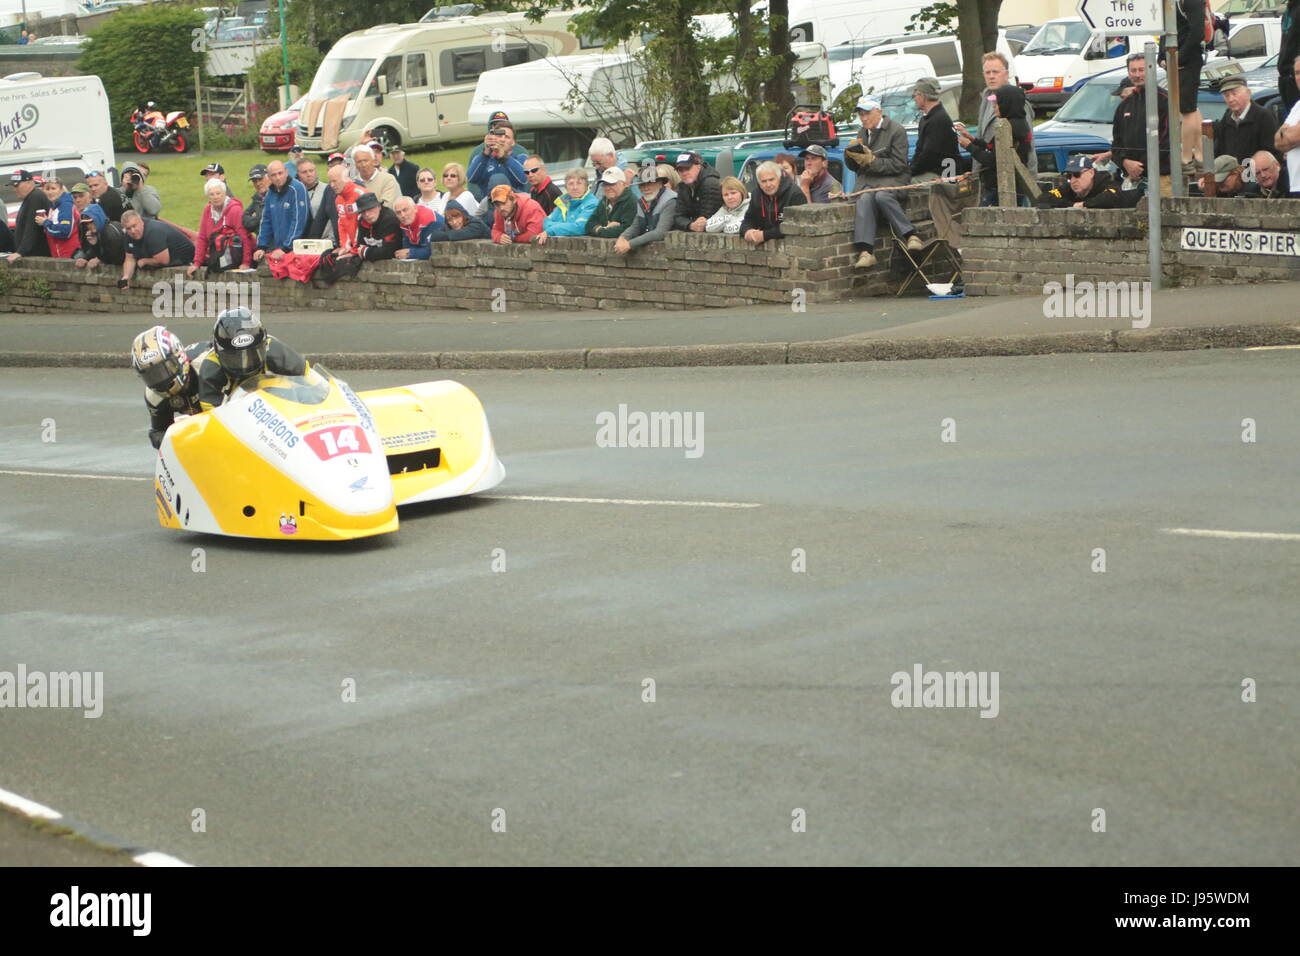 Ramsey, UK. 5th Jun, 2017. Isle of Man TT Races, Sure Sidecar Race. Number 14, John Saunders and Frank Claeys of the Stapletons Tyre Services team from Leeds, UK on their 600cc Shelbourne Honda sidecar at Cruickshanks Corner, Ramsey, Isle of Man. Credit: Louisa Jane Bawden/Alamy Live News. Stock Photo